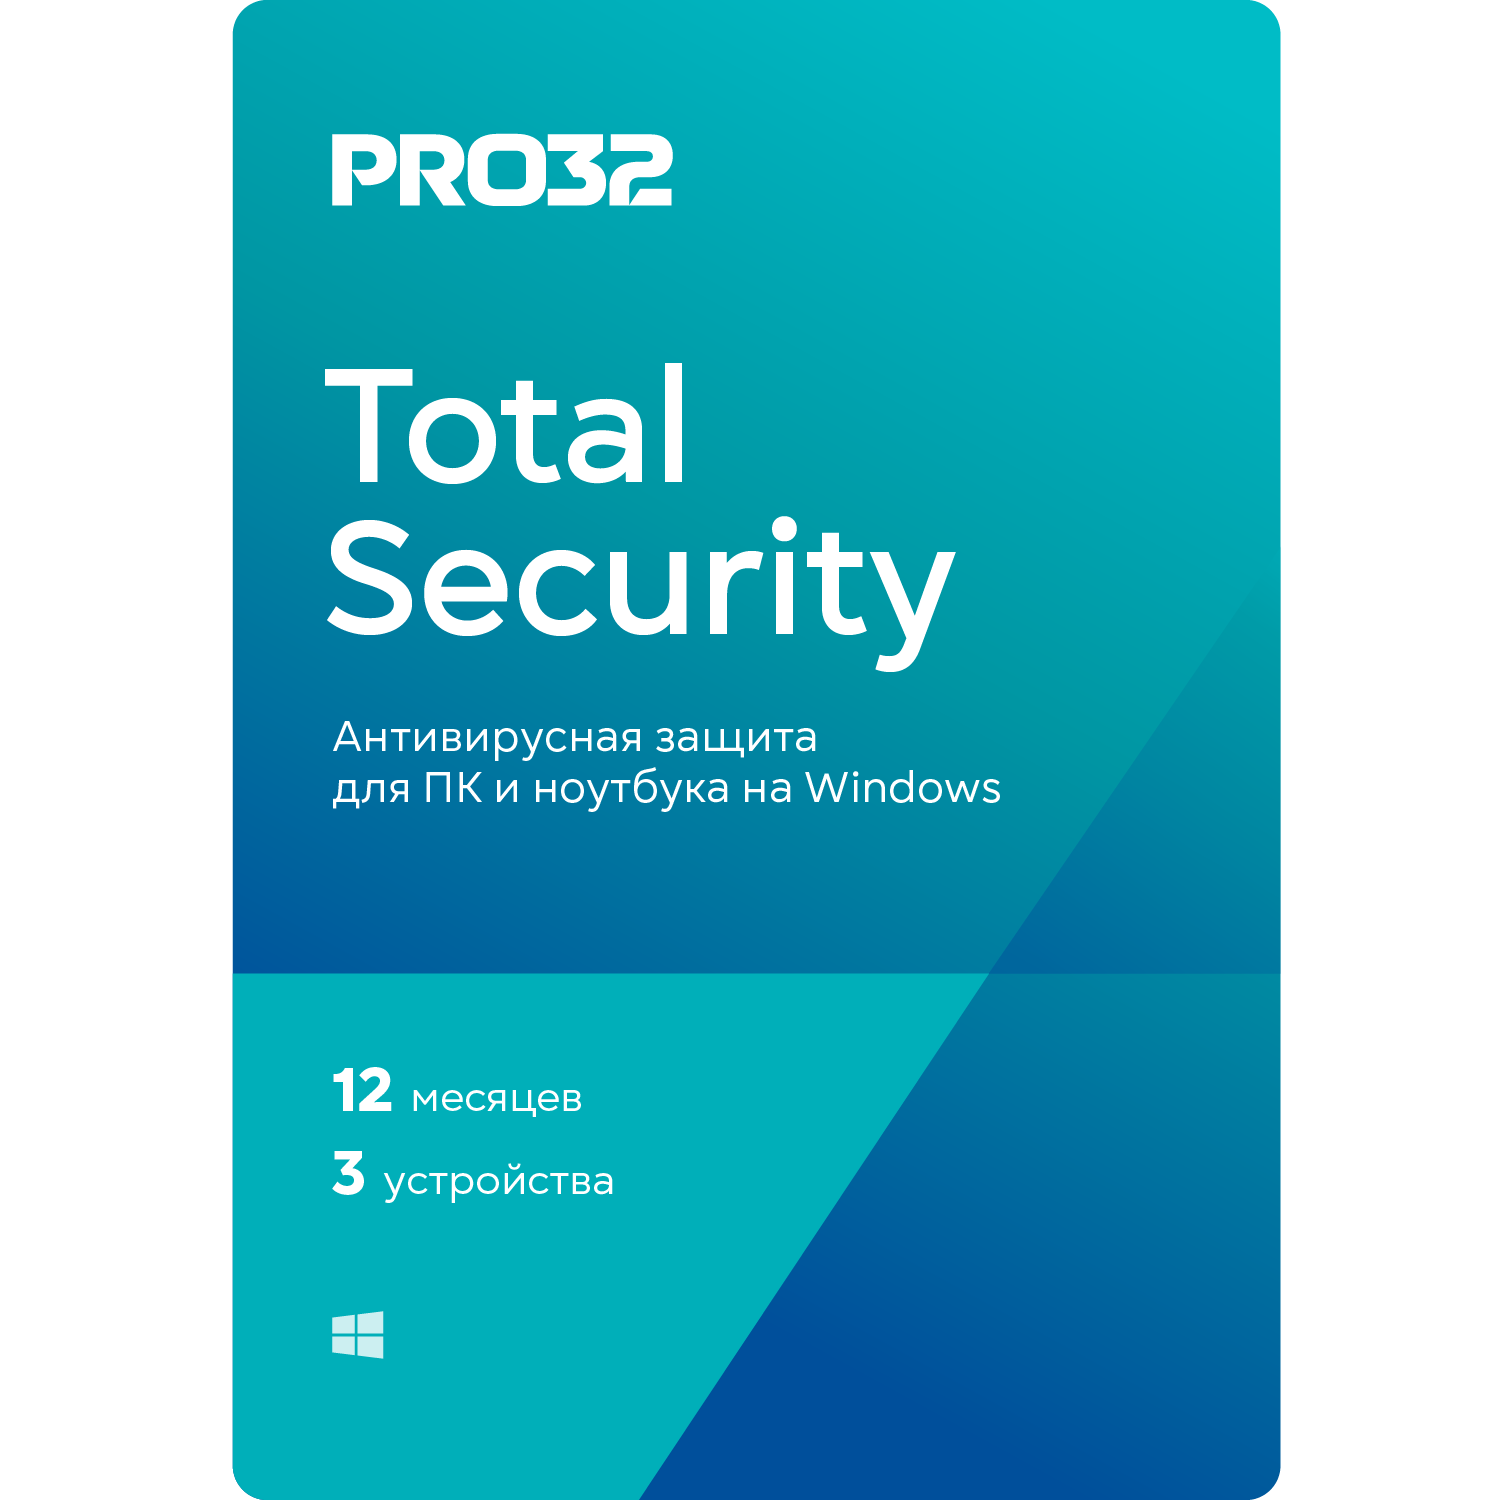 NEW - PRO32 Total Security